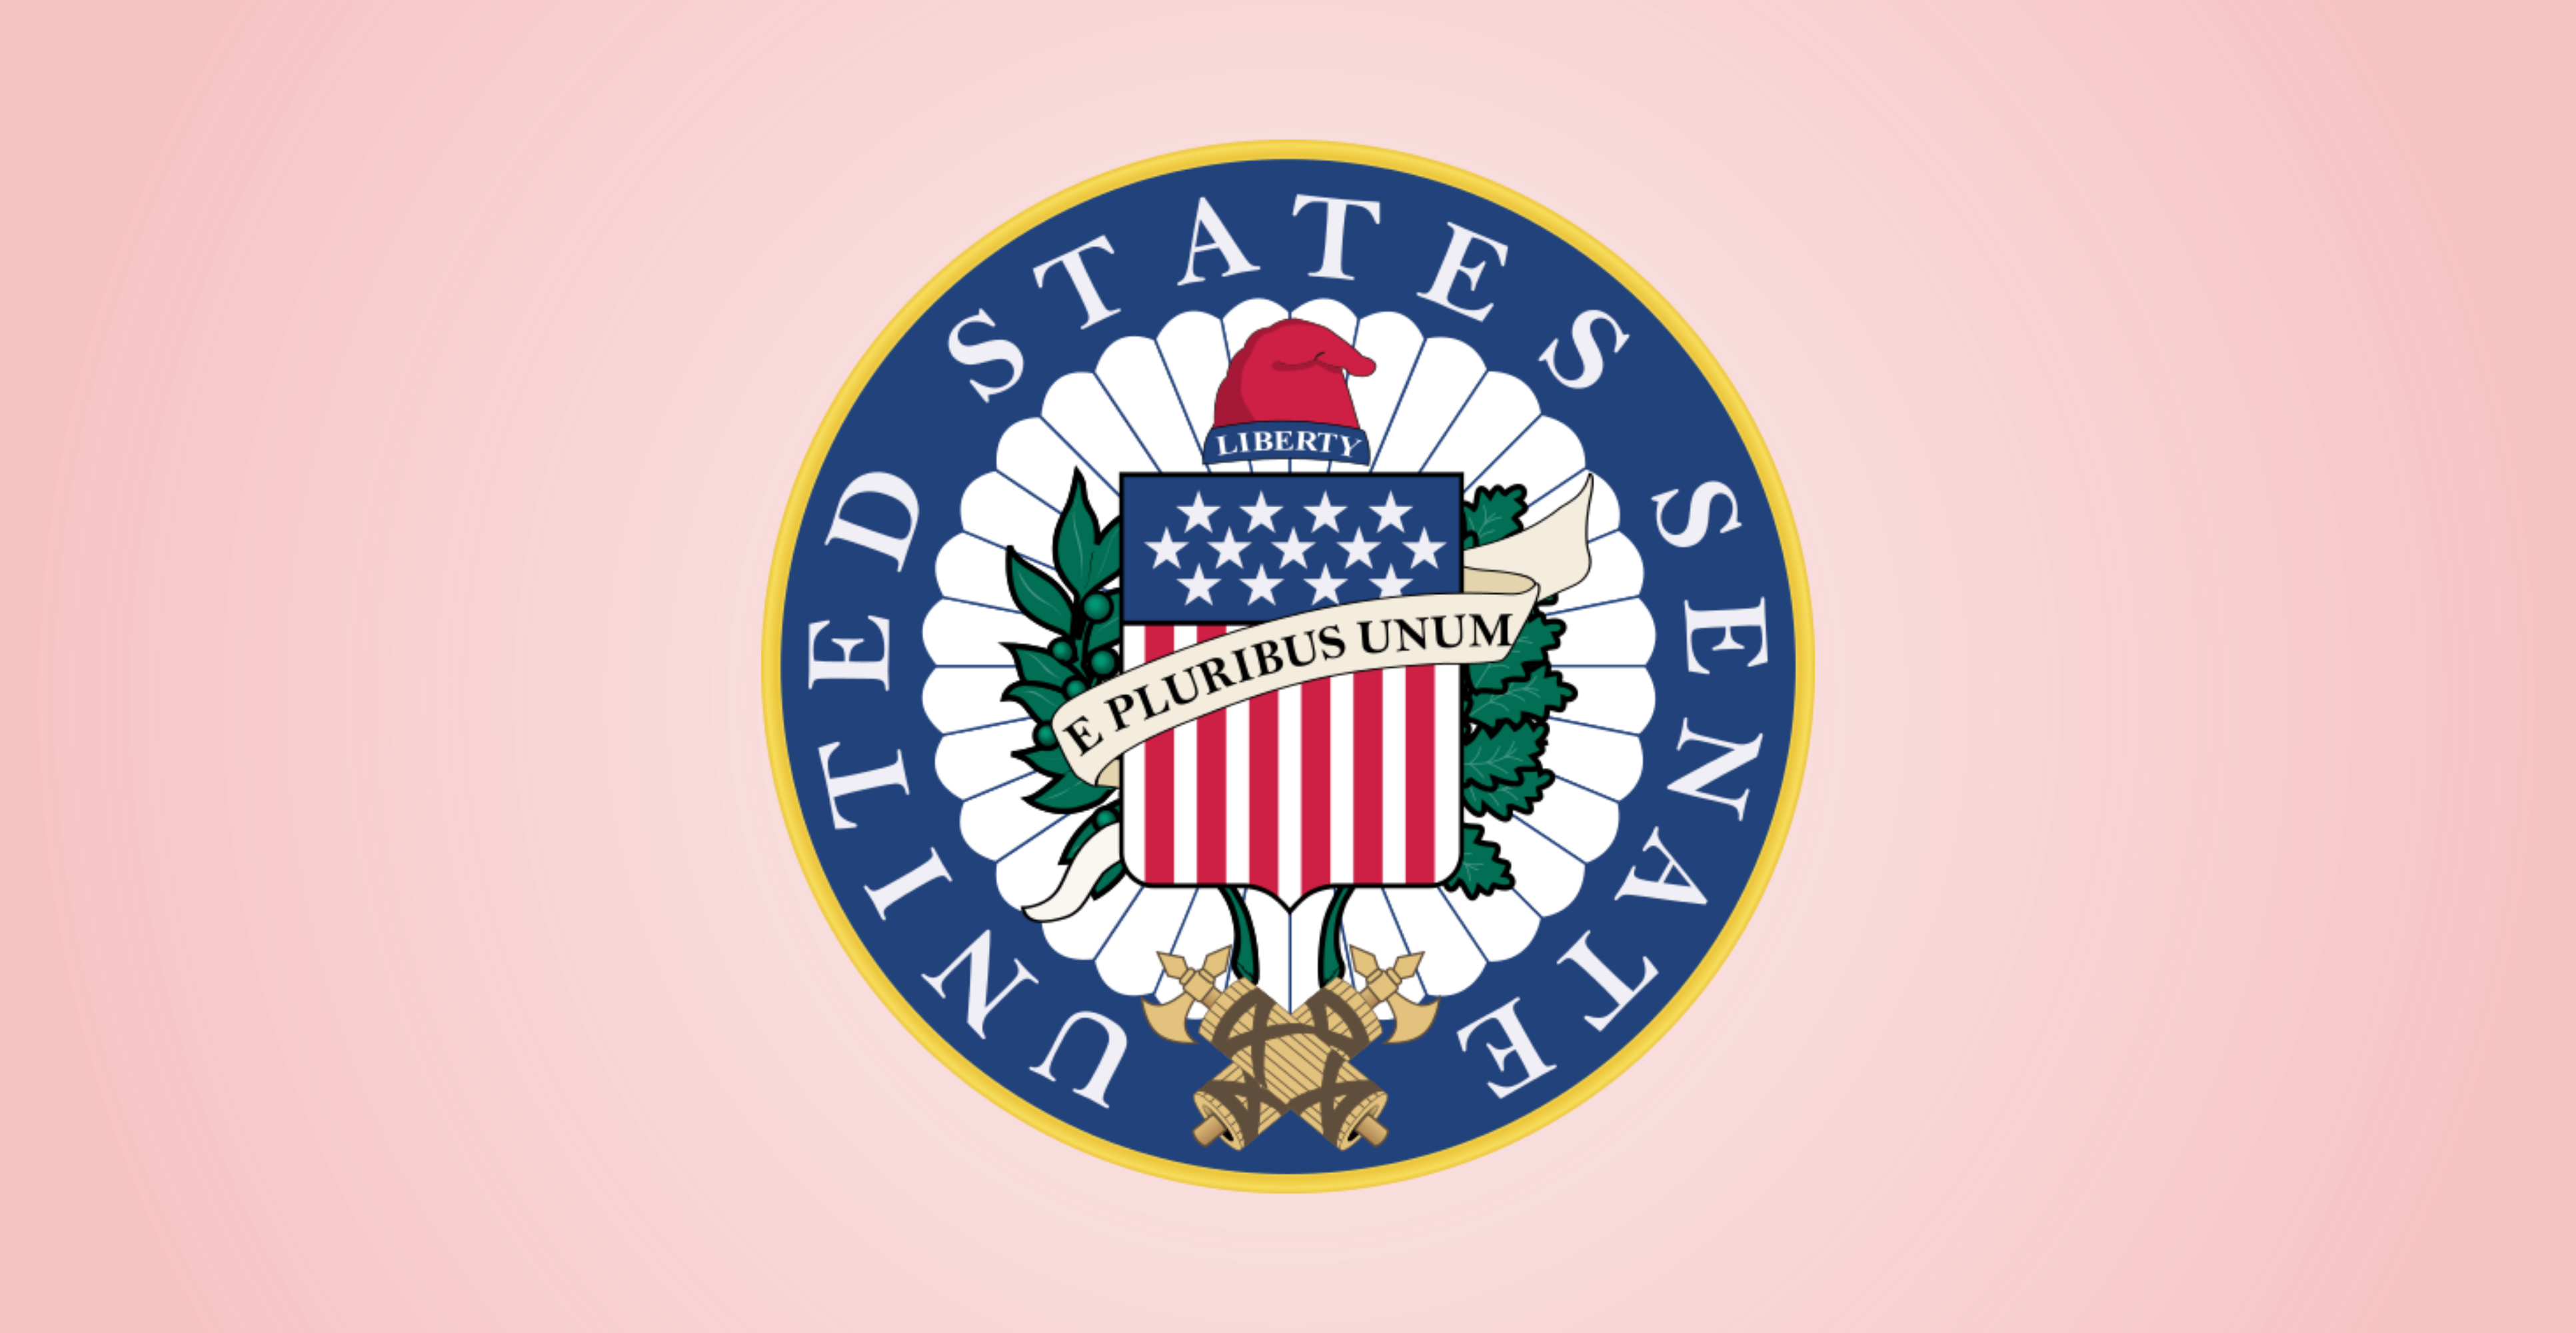 The Seal of the United States Senate